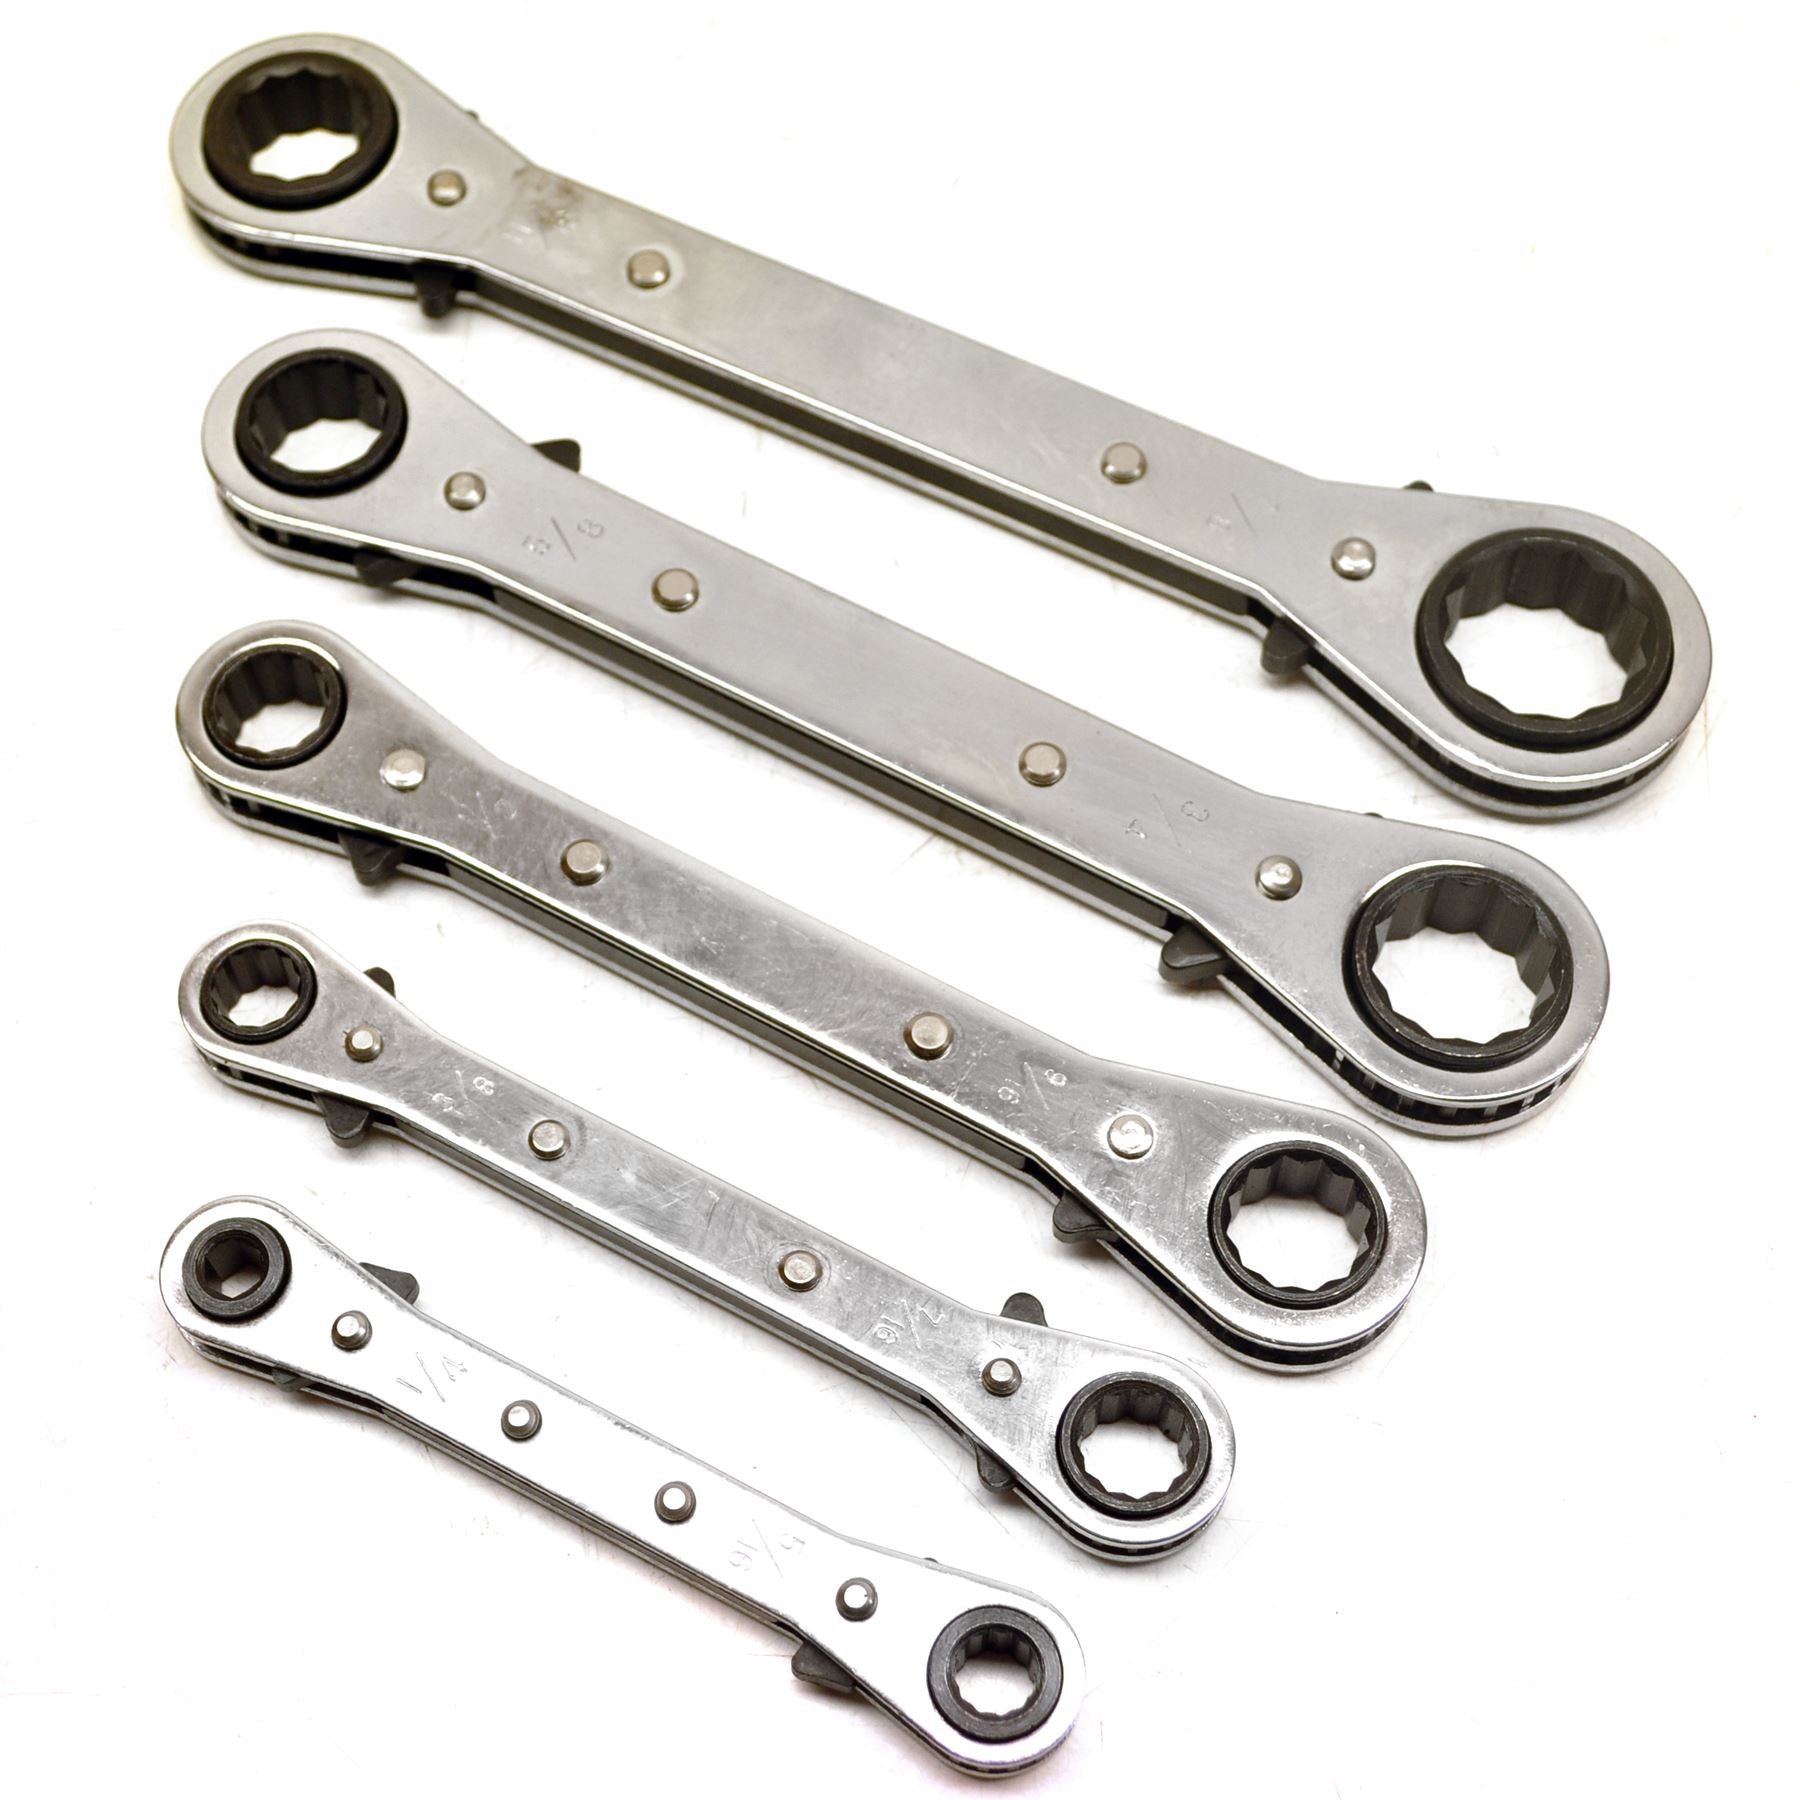 Ratchet Spanner Wrench Set Metric and Imperial AF SAE Sizes Double Ring